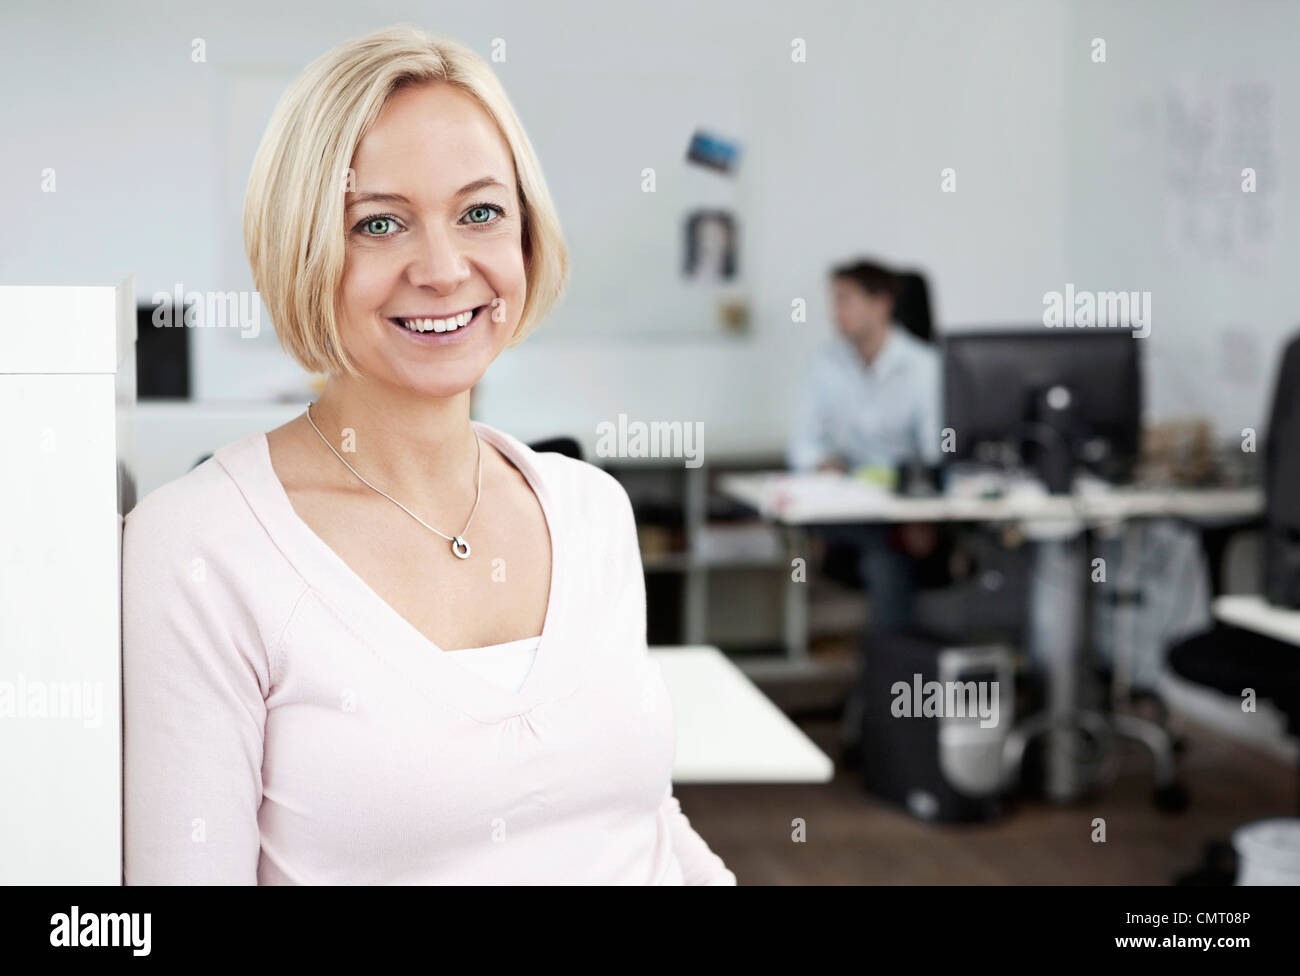 Smiling woman at the office with people in the background Stock Photo